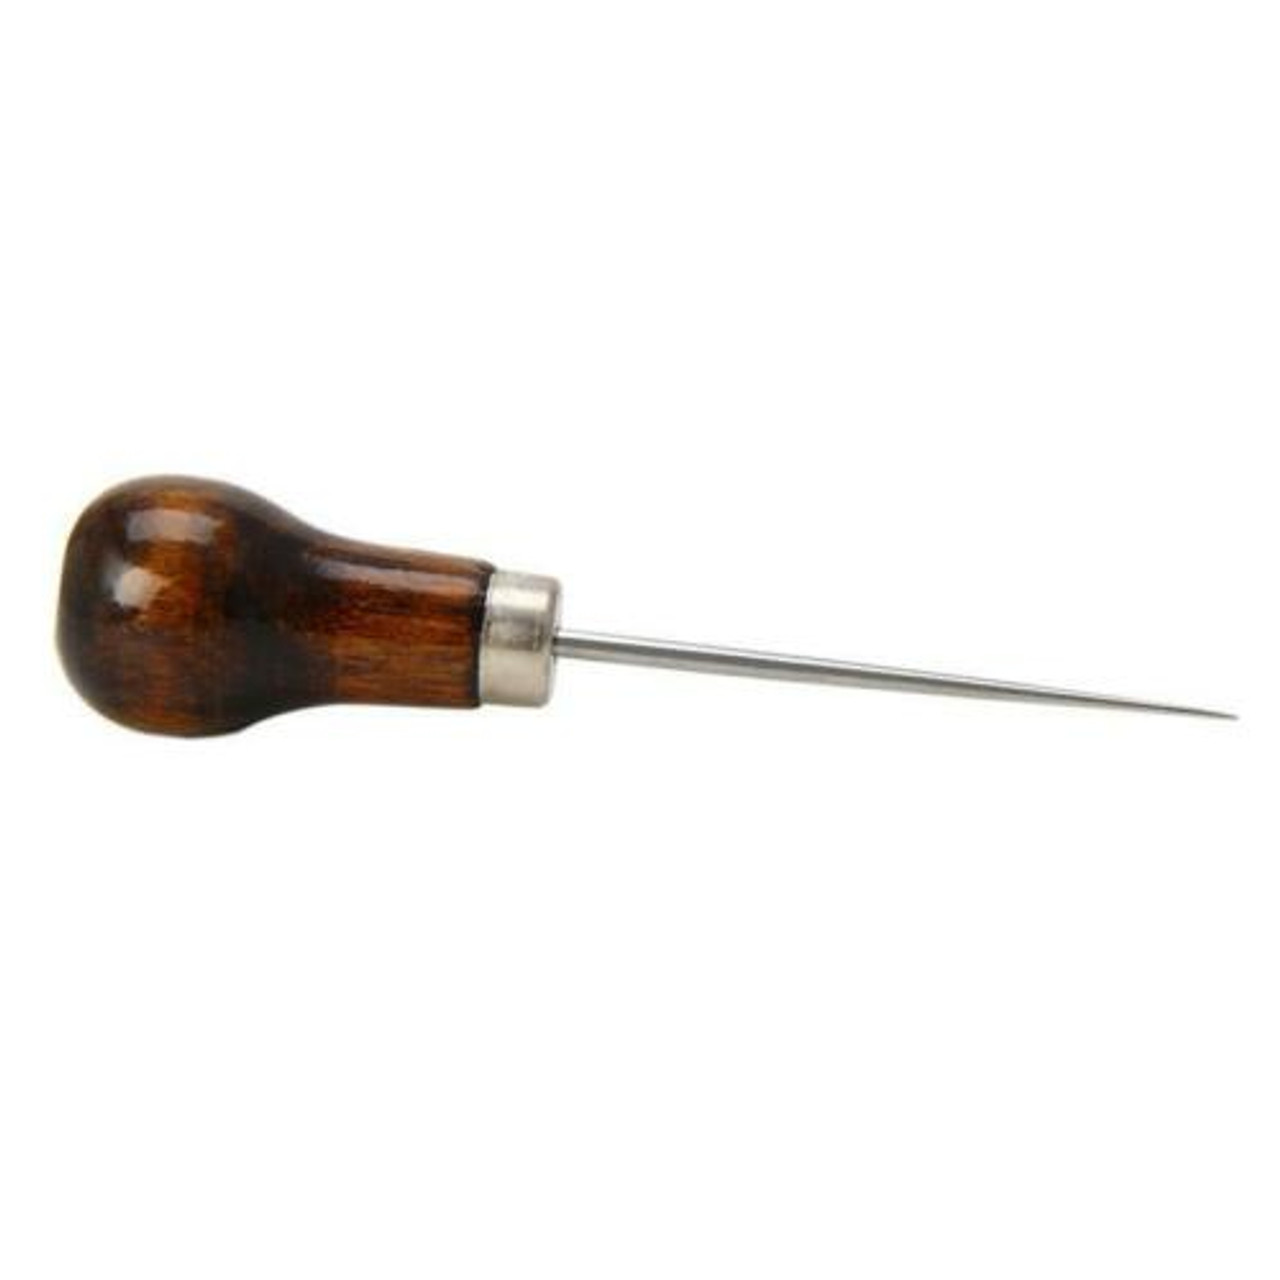 Awl Punch Wooden Handle